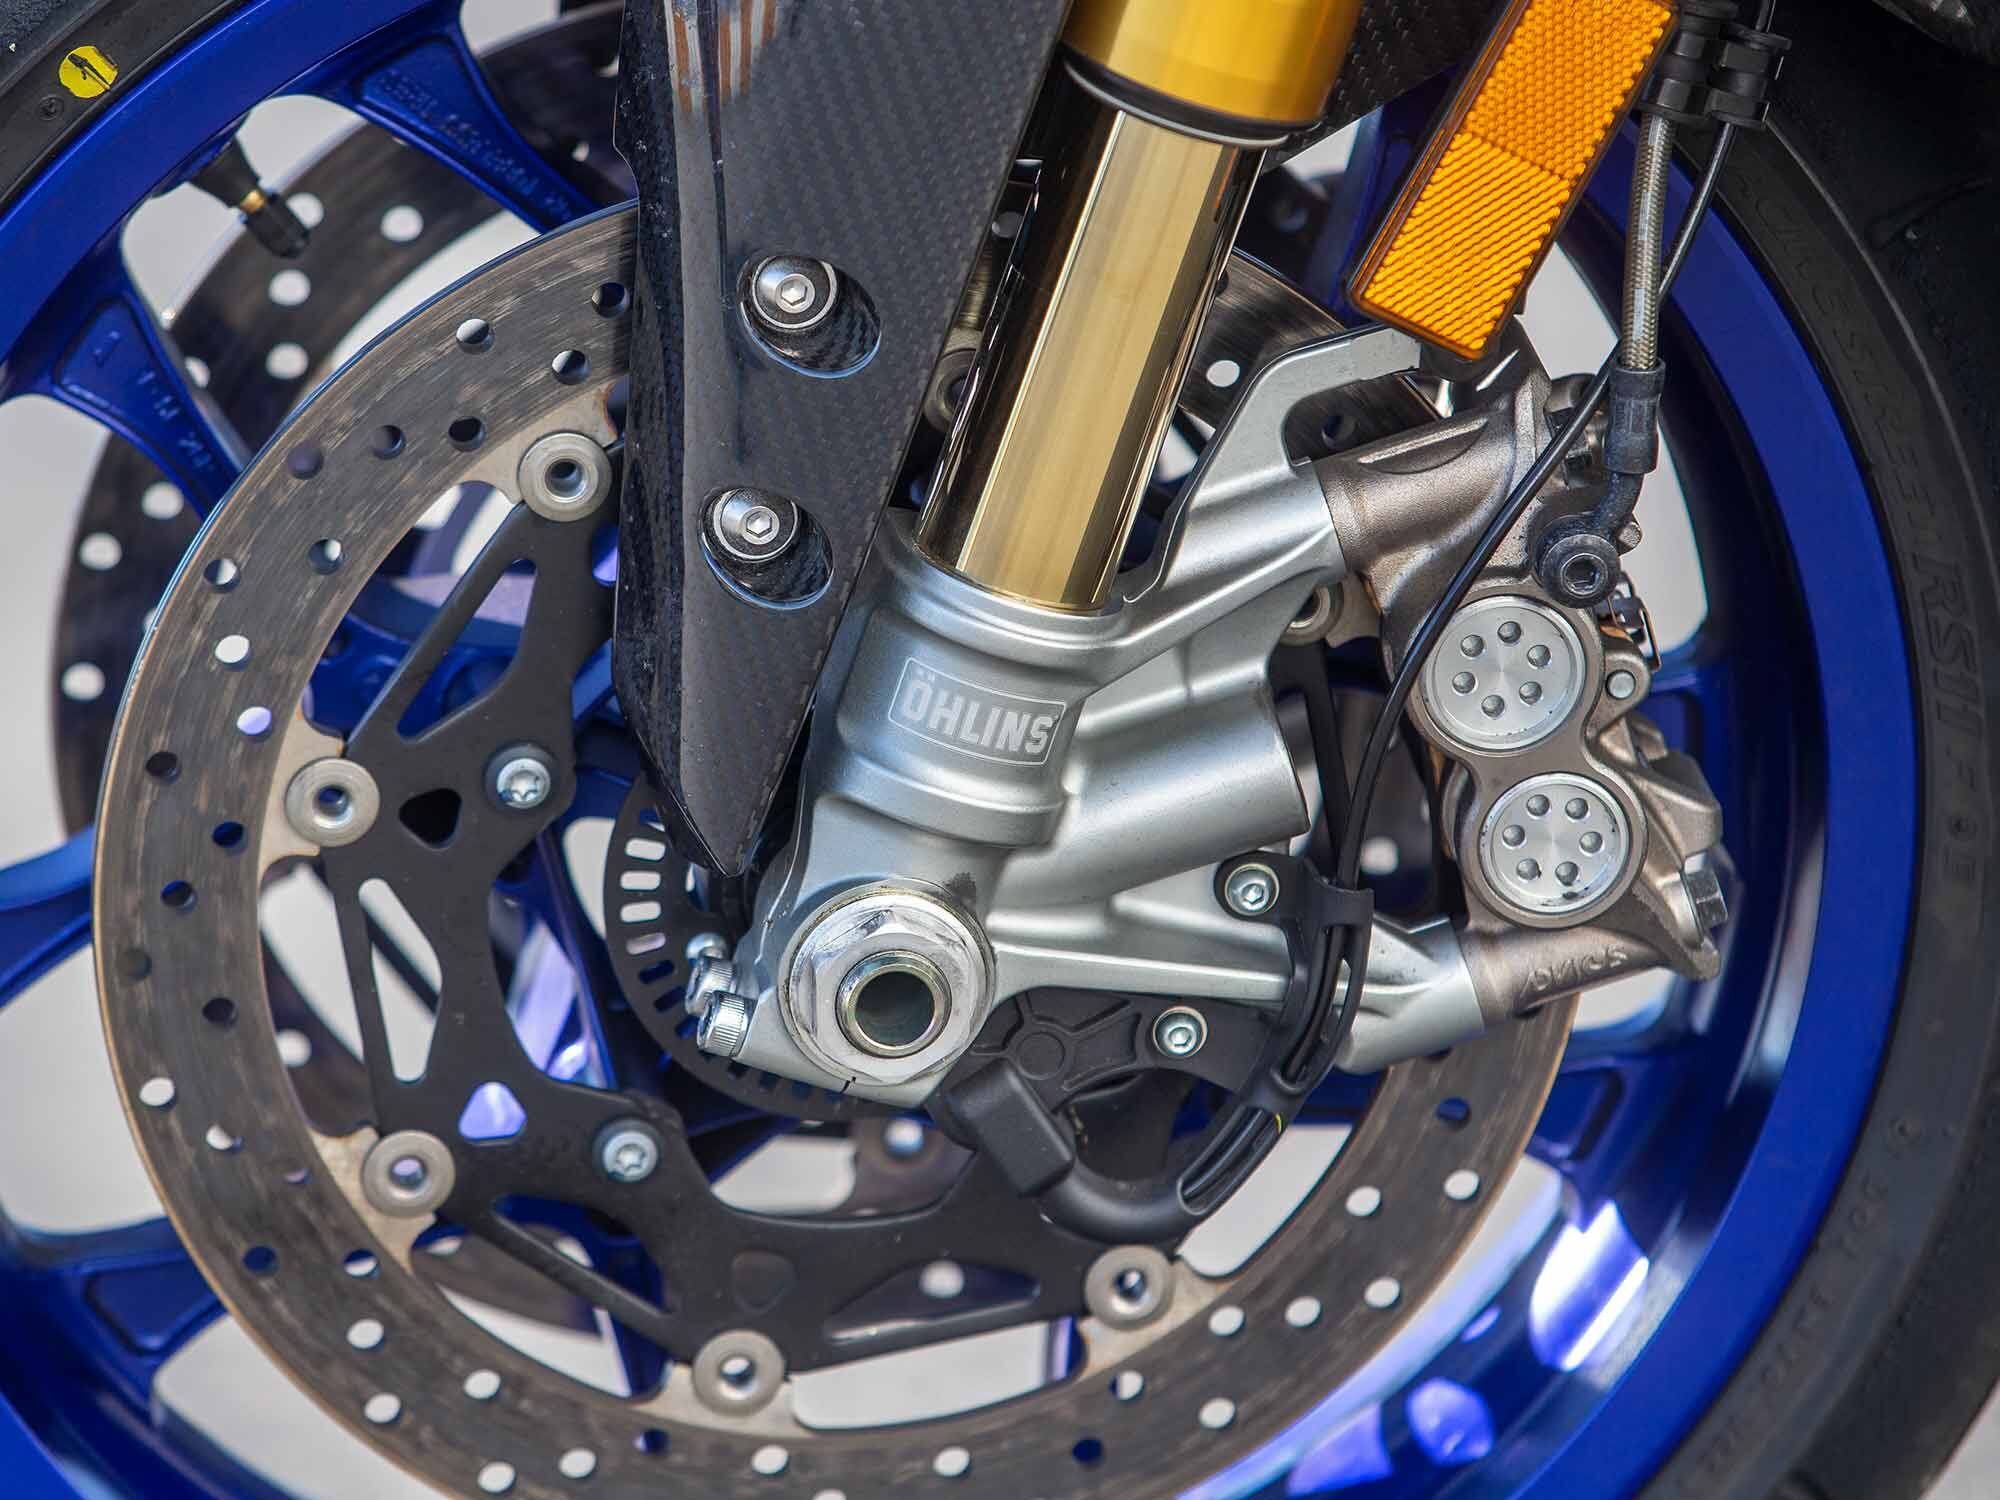 The ‘21 YZF-R1M employs Öhlins latest and greatest semi-active electronic suspension with a gas-charged fork. The suspension offers versatile performance with a few pushes of a button.